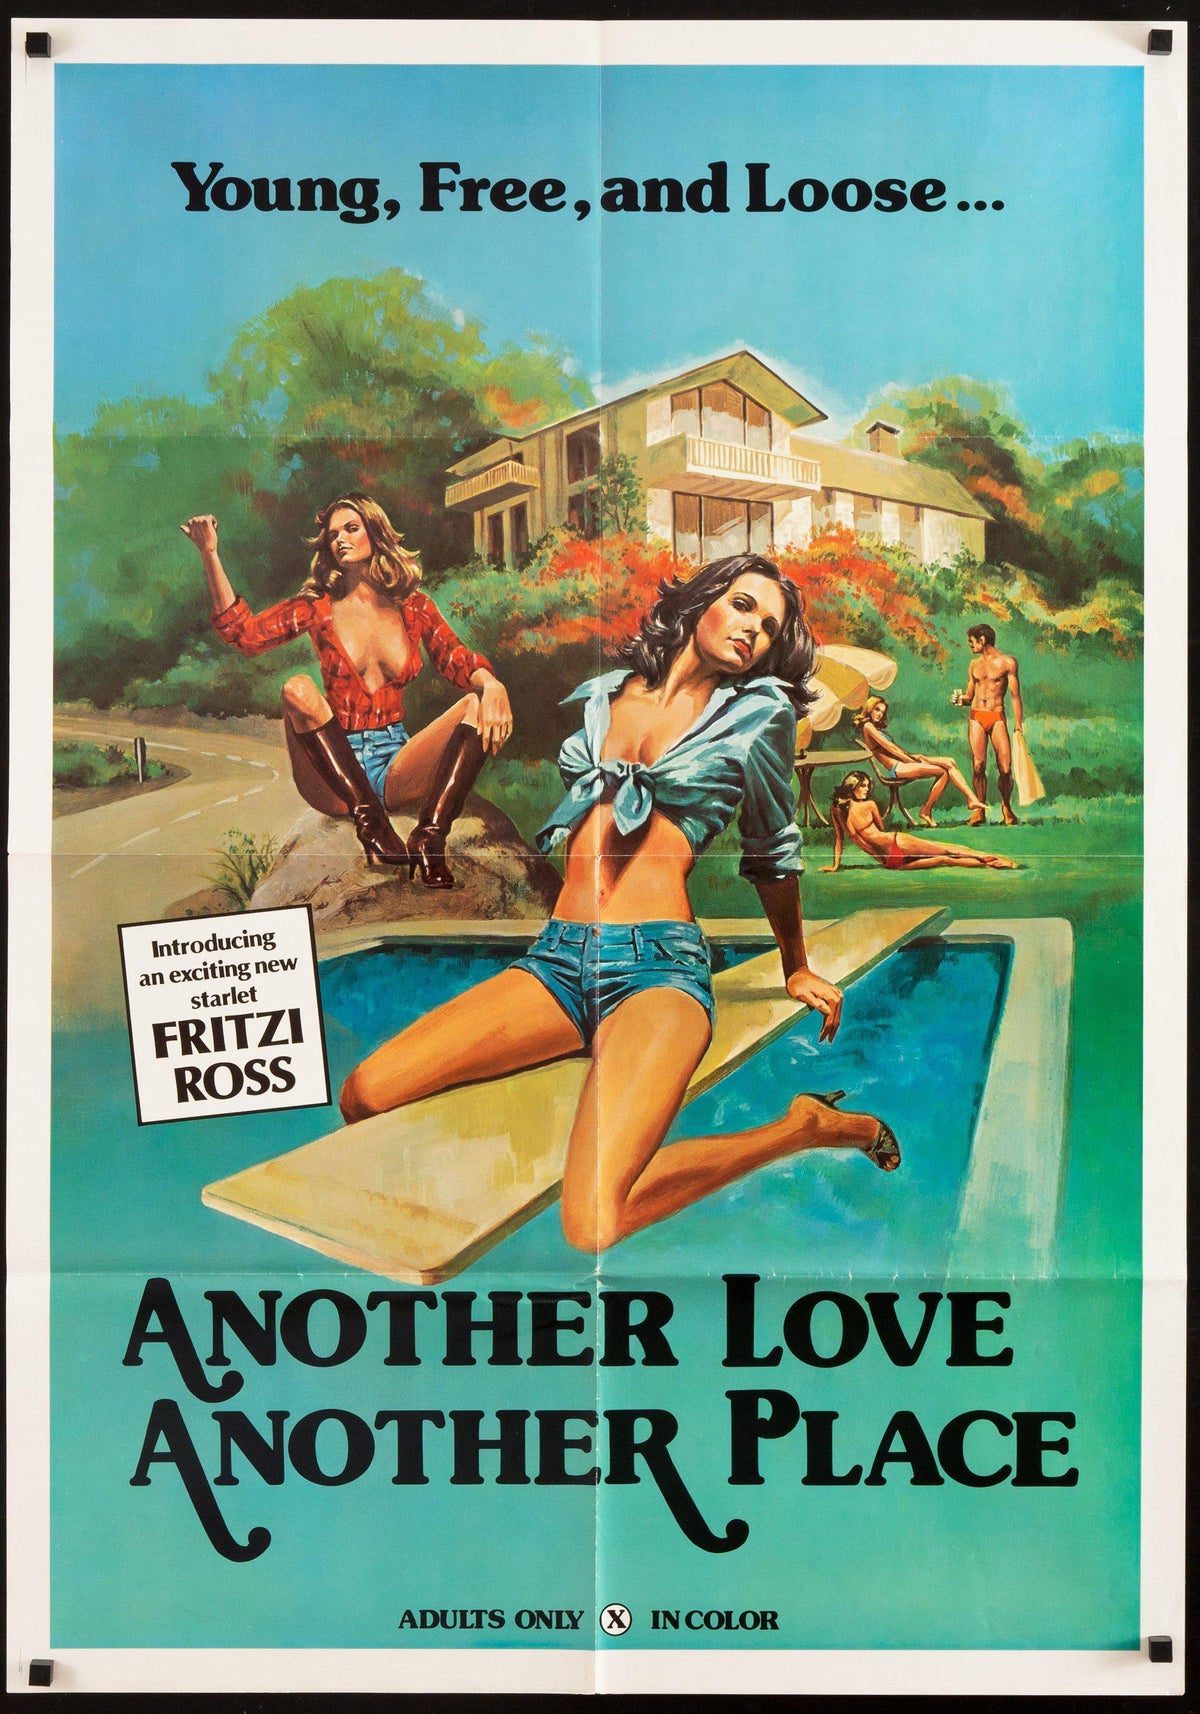 Another Love Another Place 1 Sheet (27x41) Original Vintage Movie Poster